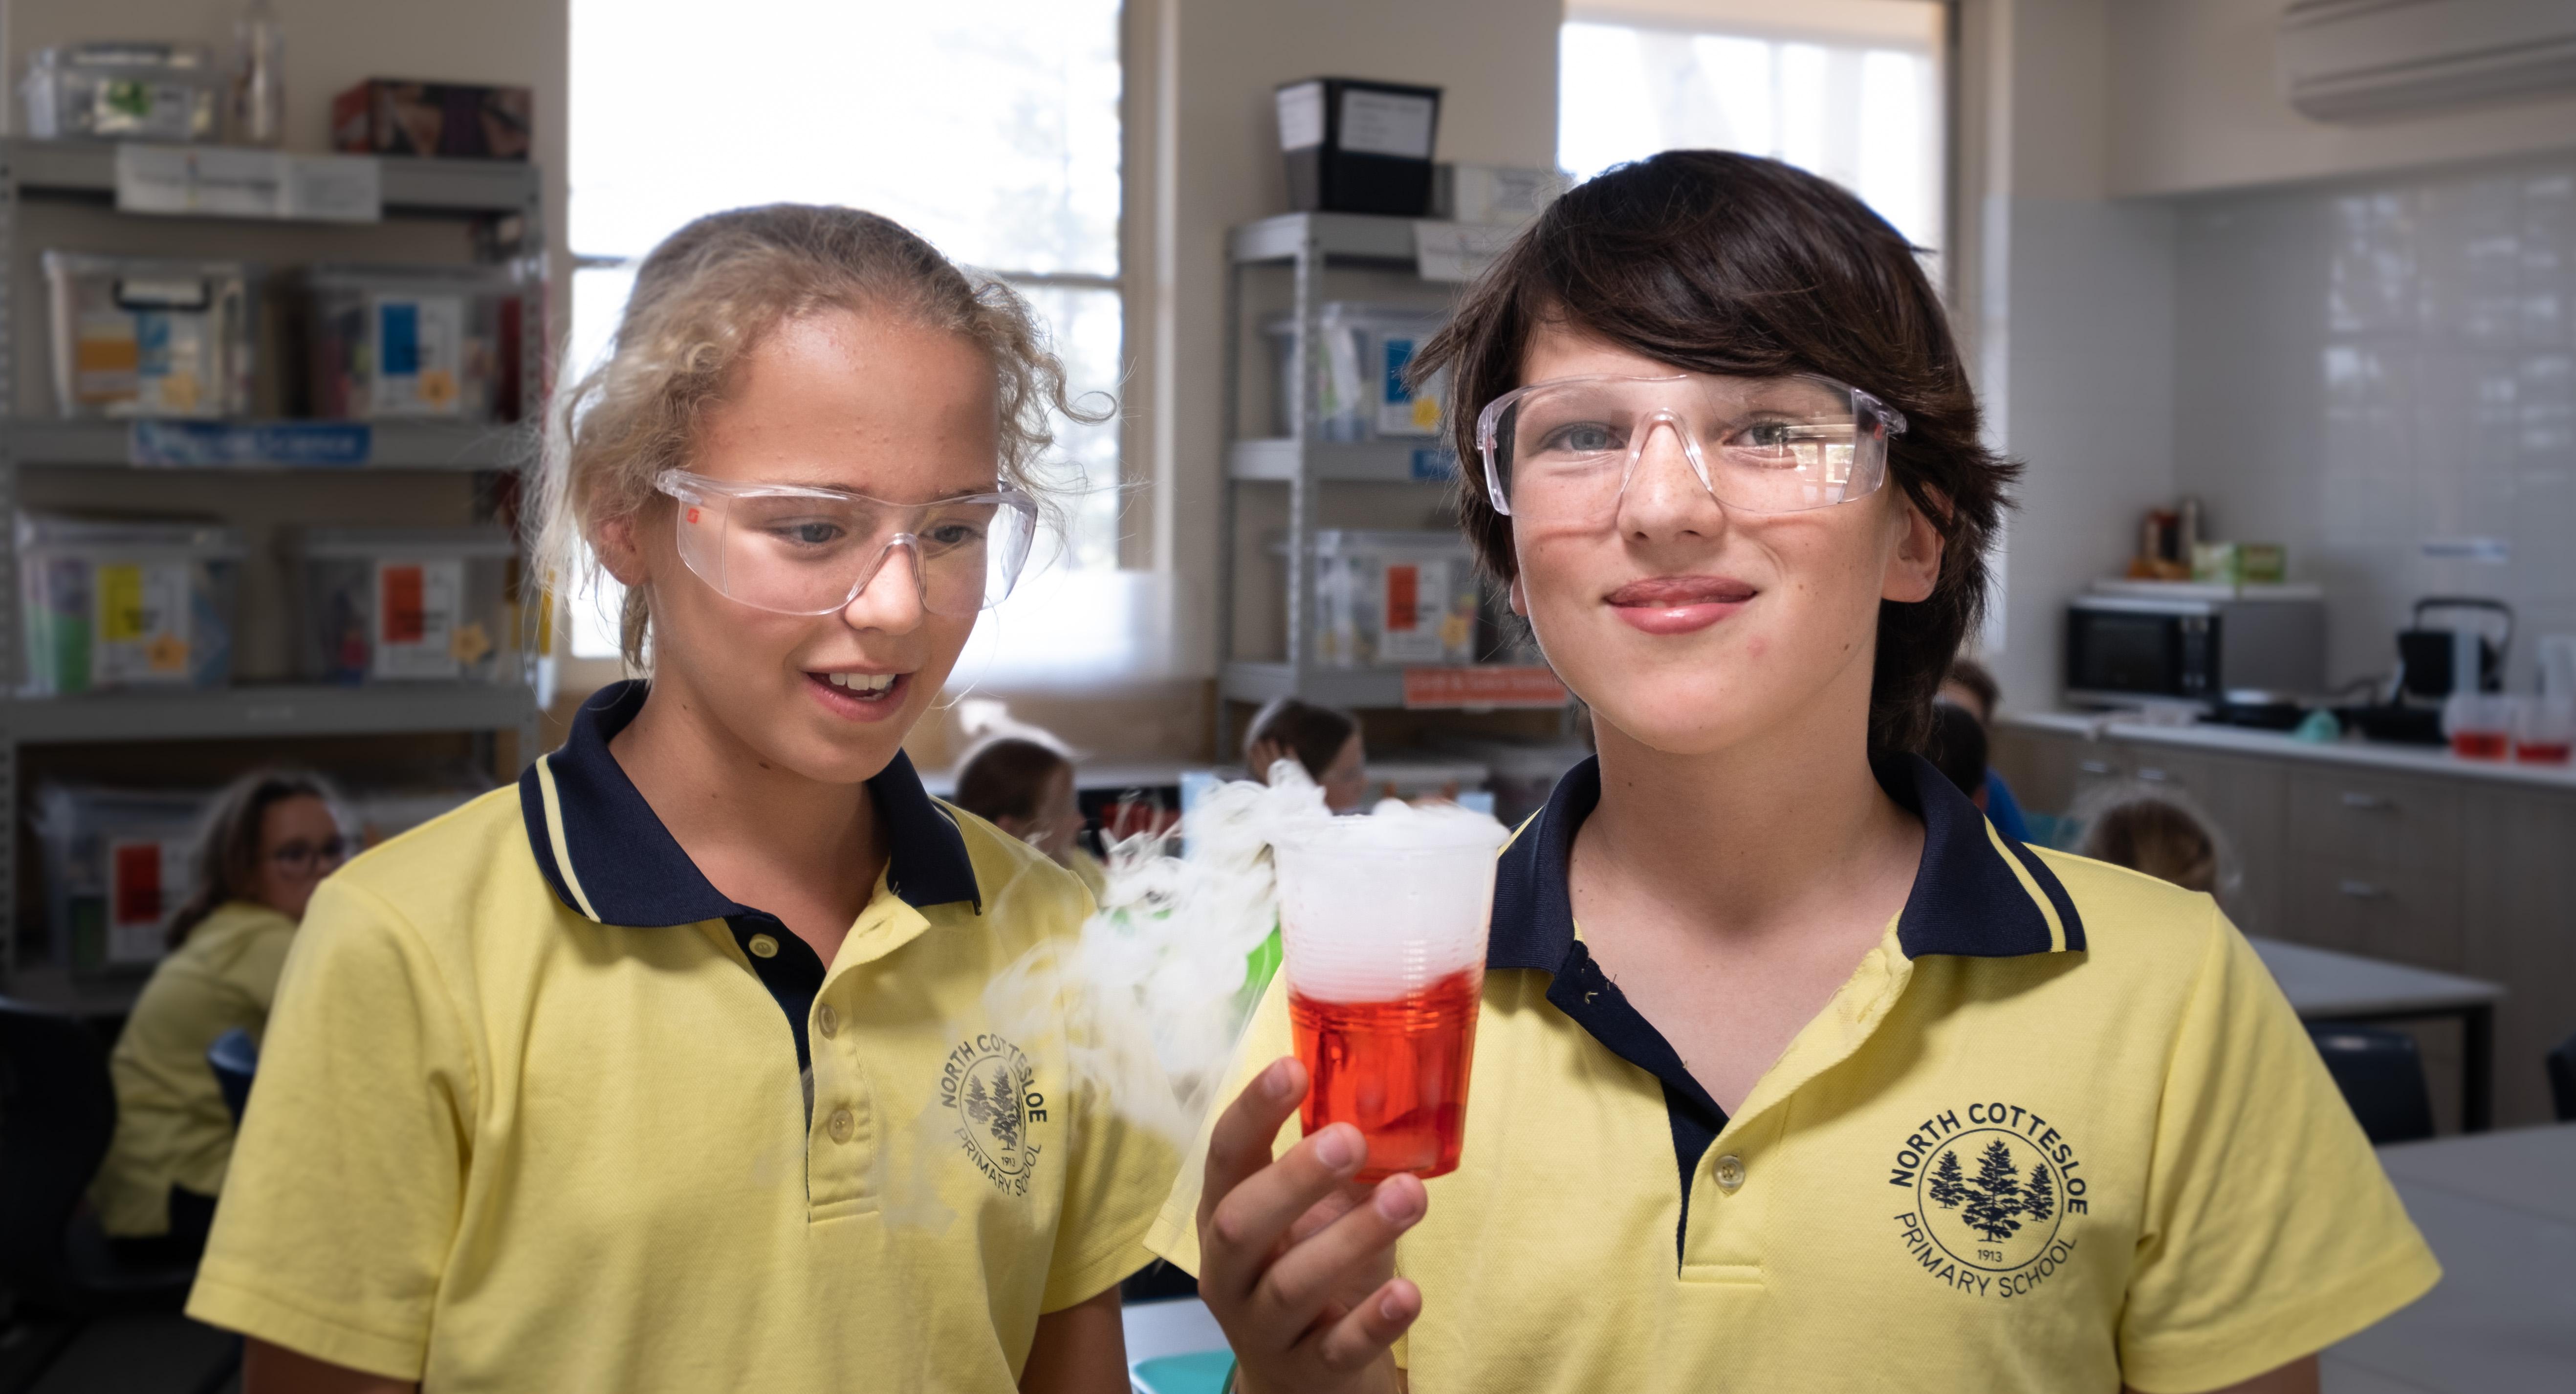 Students performing a science experiment